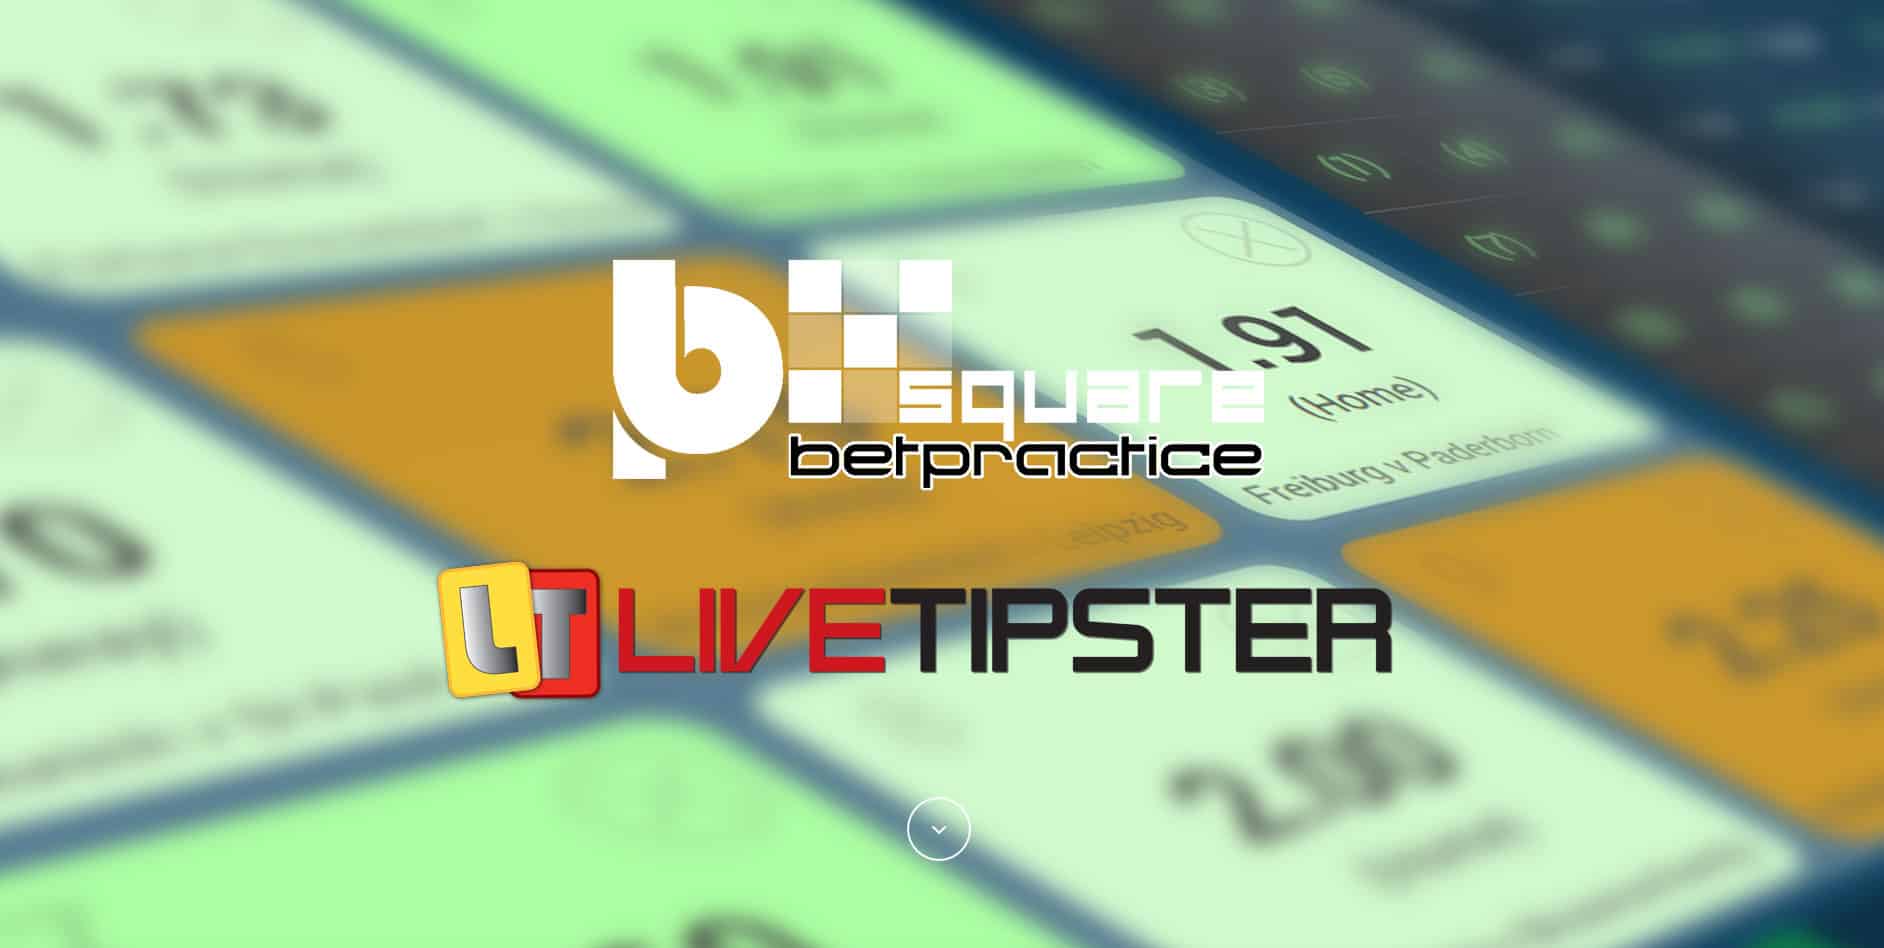 betpractice livetipster